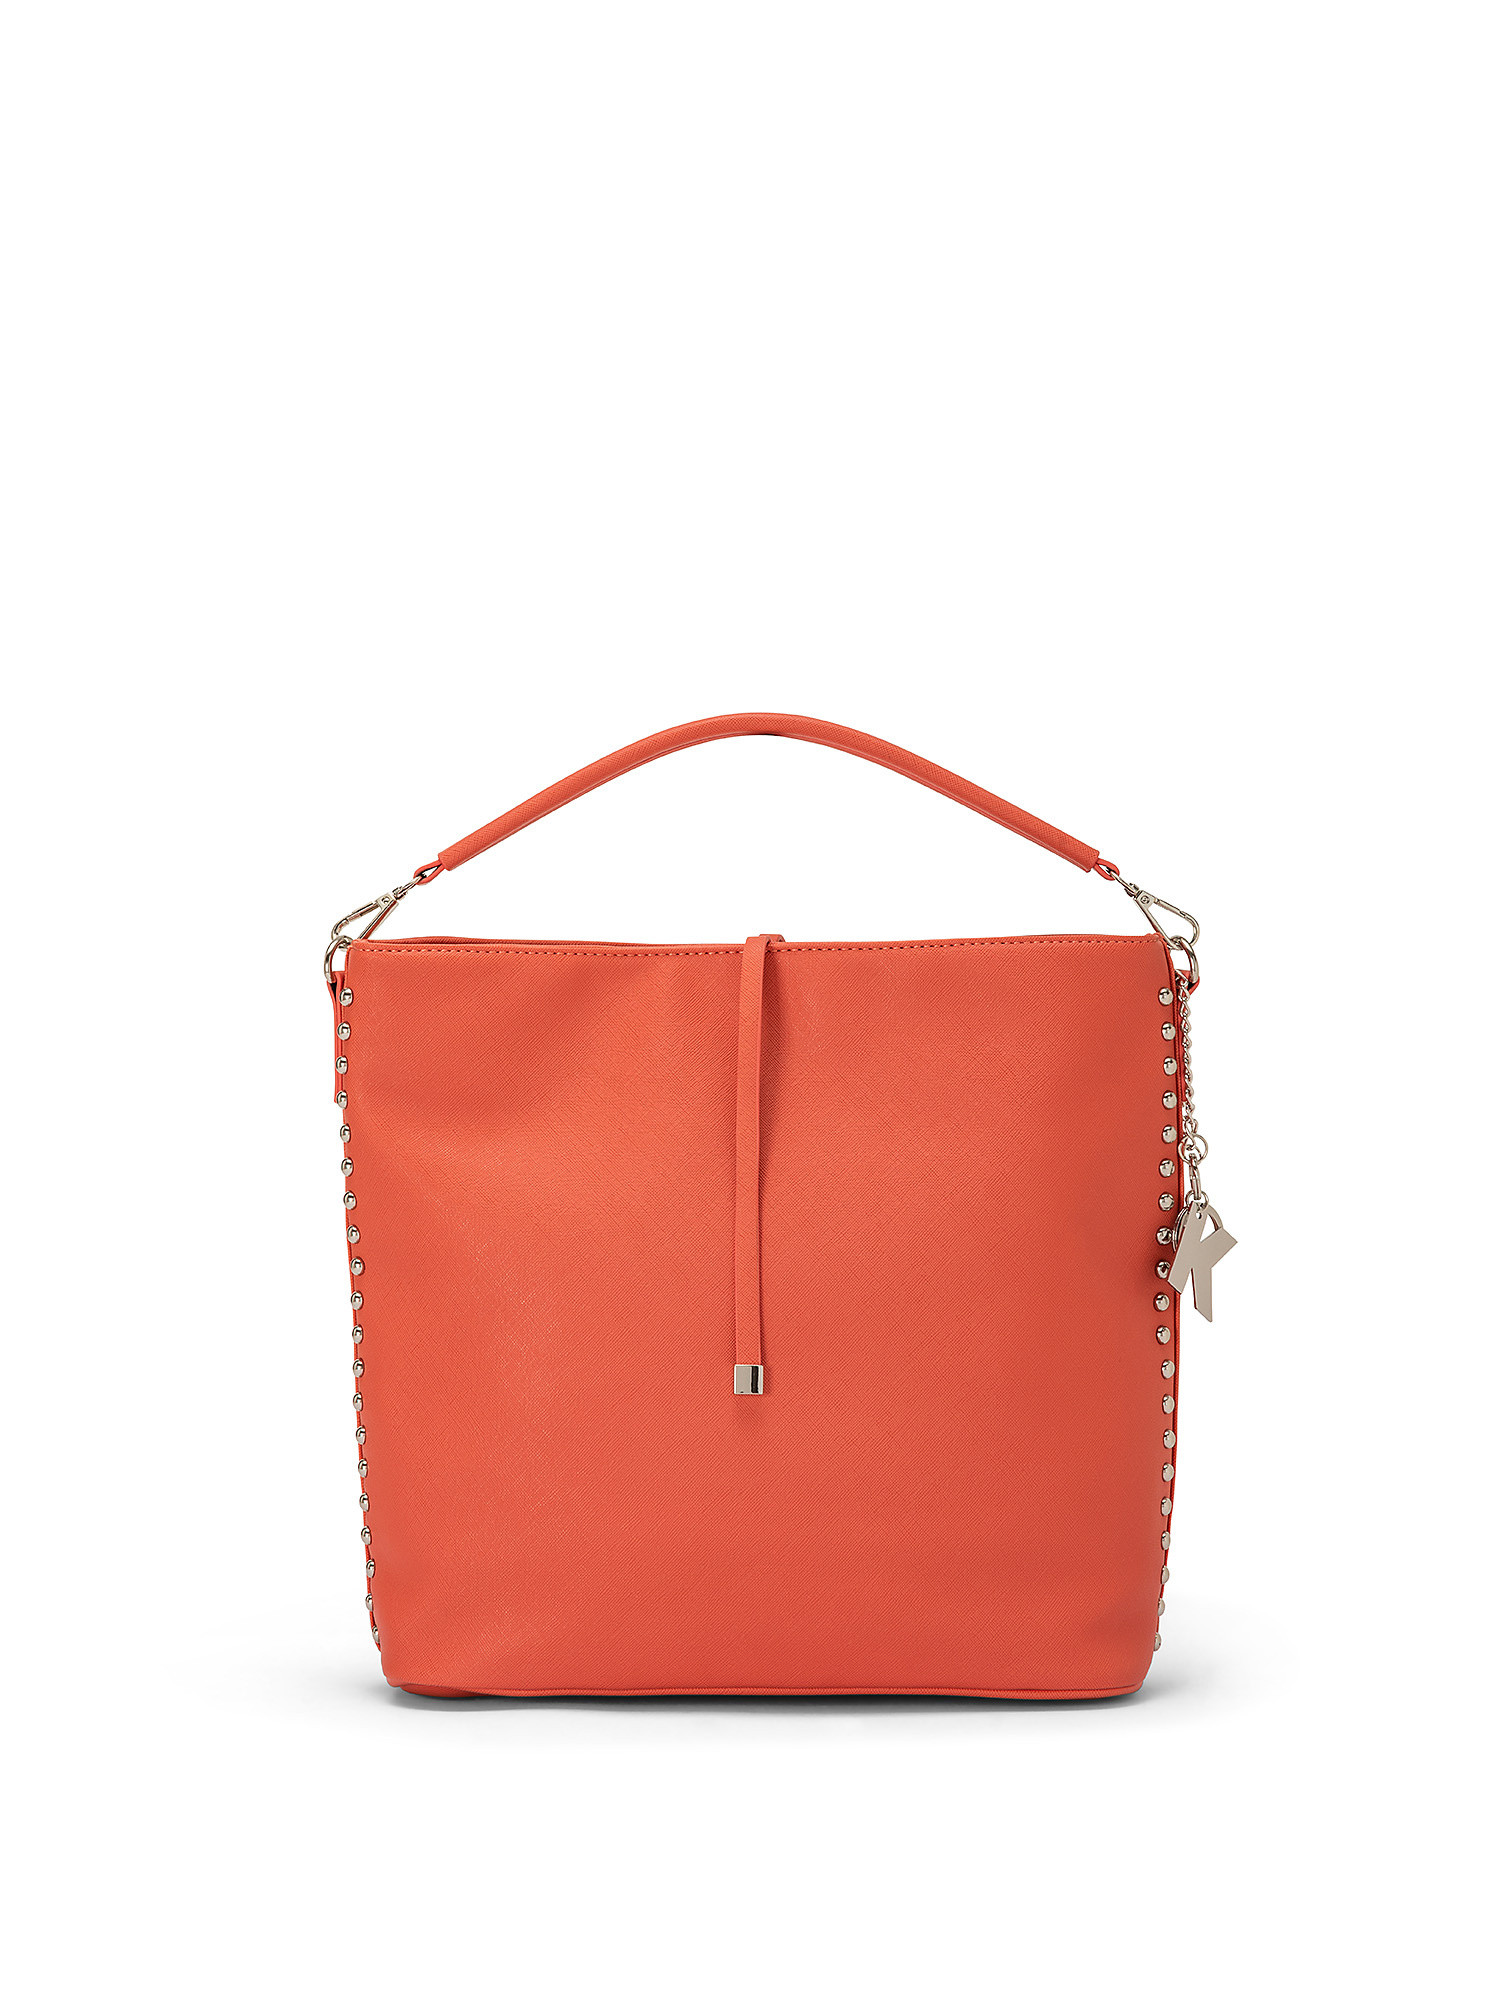 Borsa Hobo, Rosso corallo, large image number 0